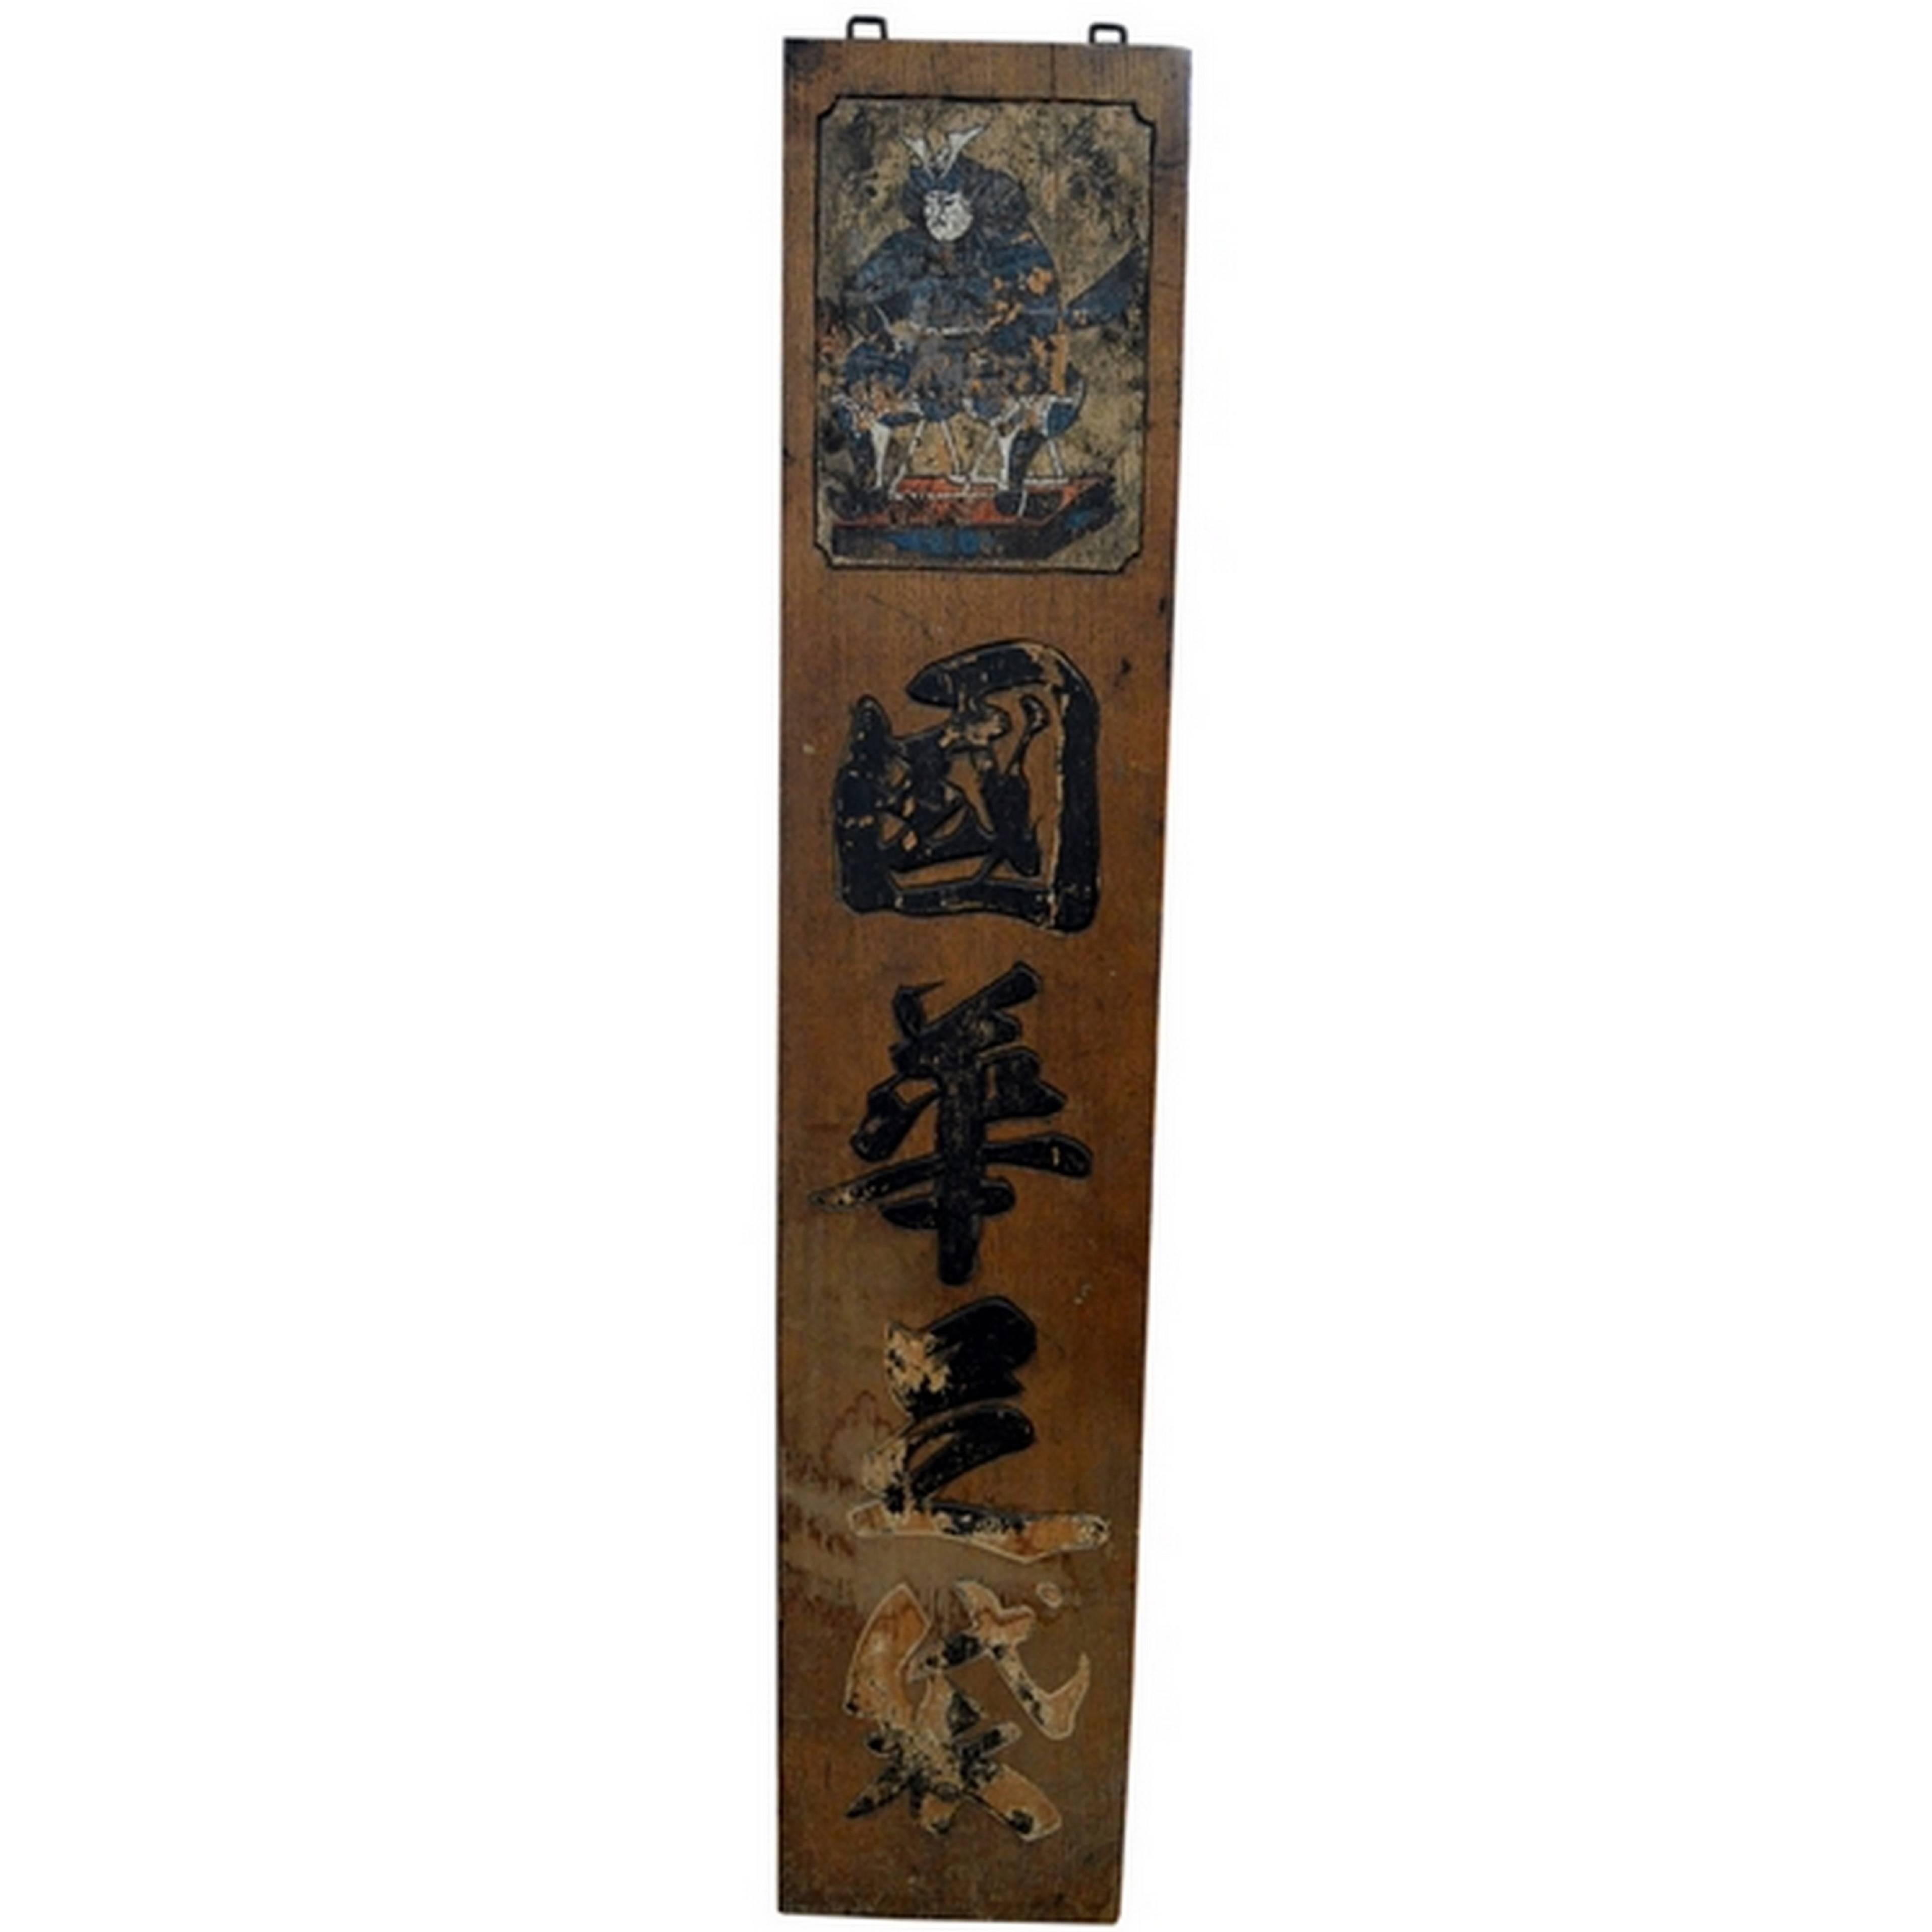 Antique Japanese Meiji Period Painted Wood Sign with a Samurai, 19th Century